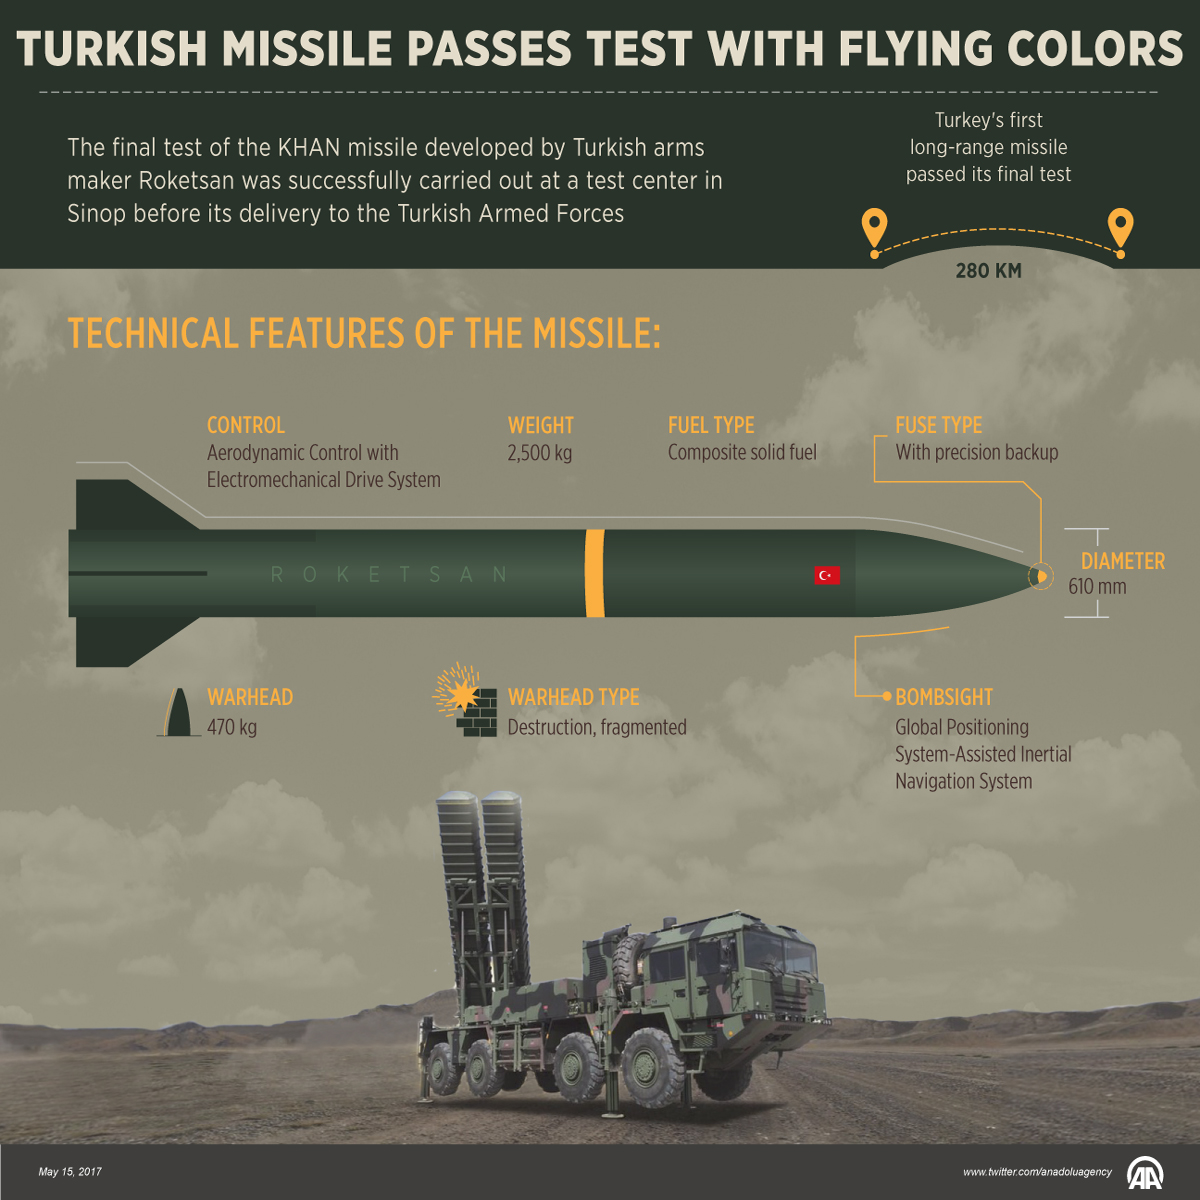 Turkish missile passes test with flying colors